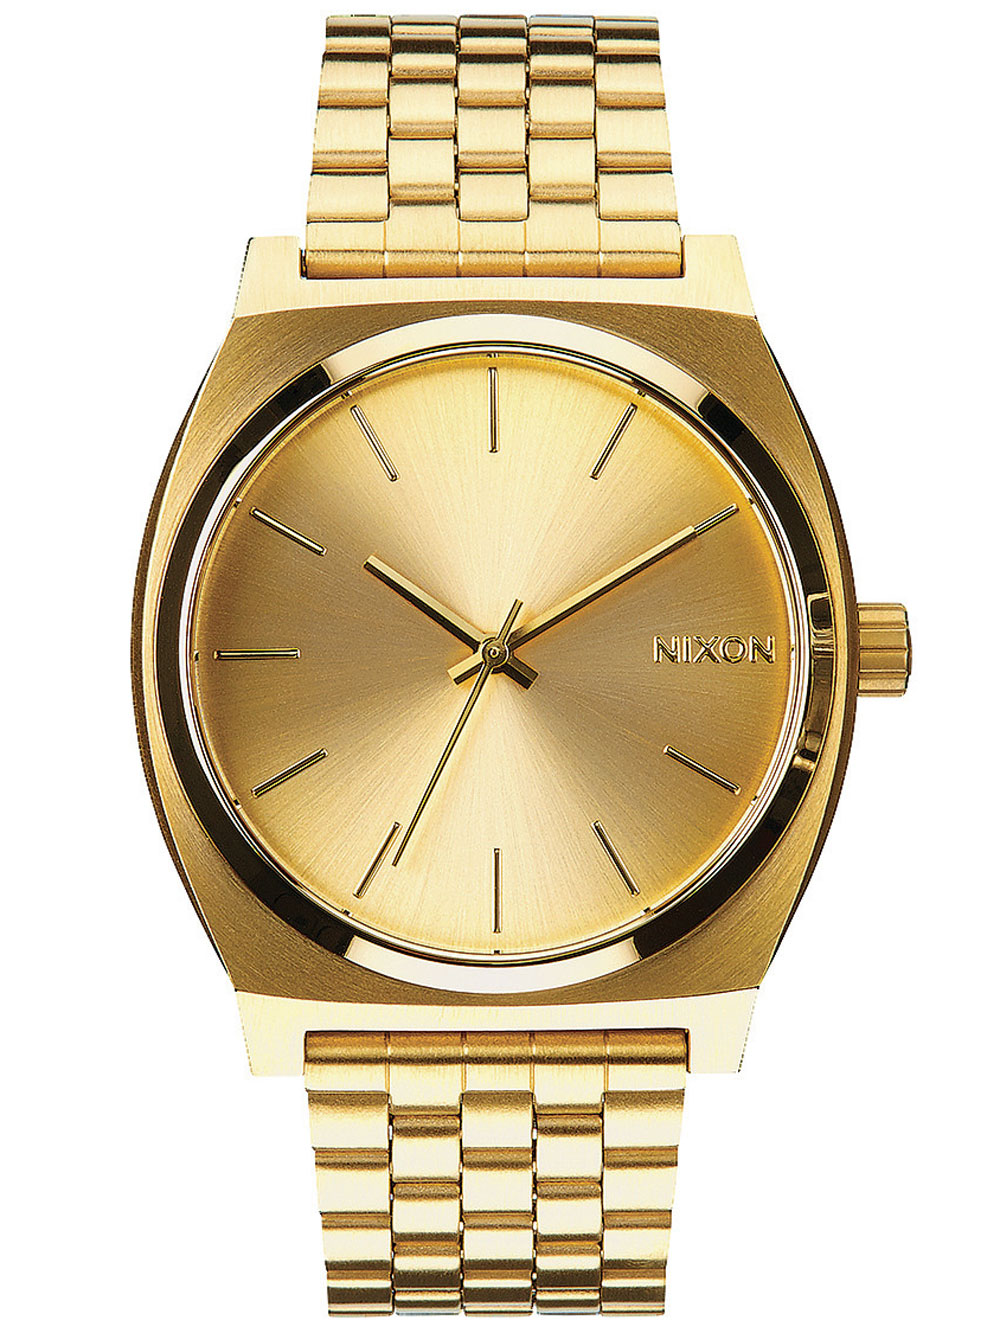 NIXON A045-511 Time Teller All Gold Gold 37mm 10ATM